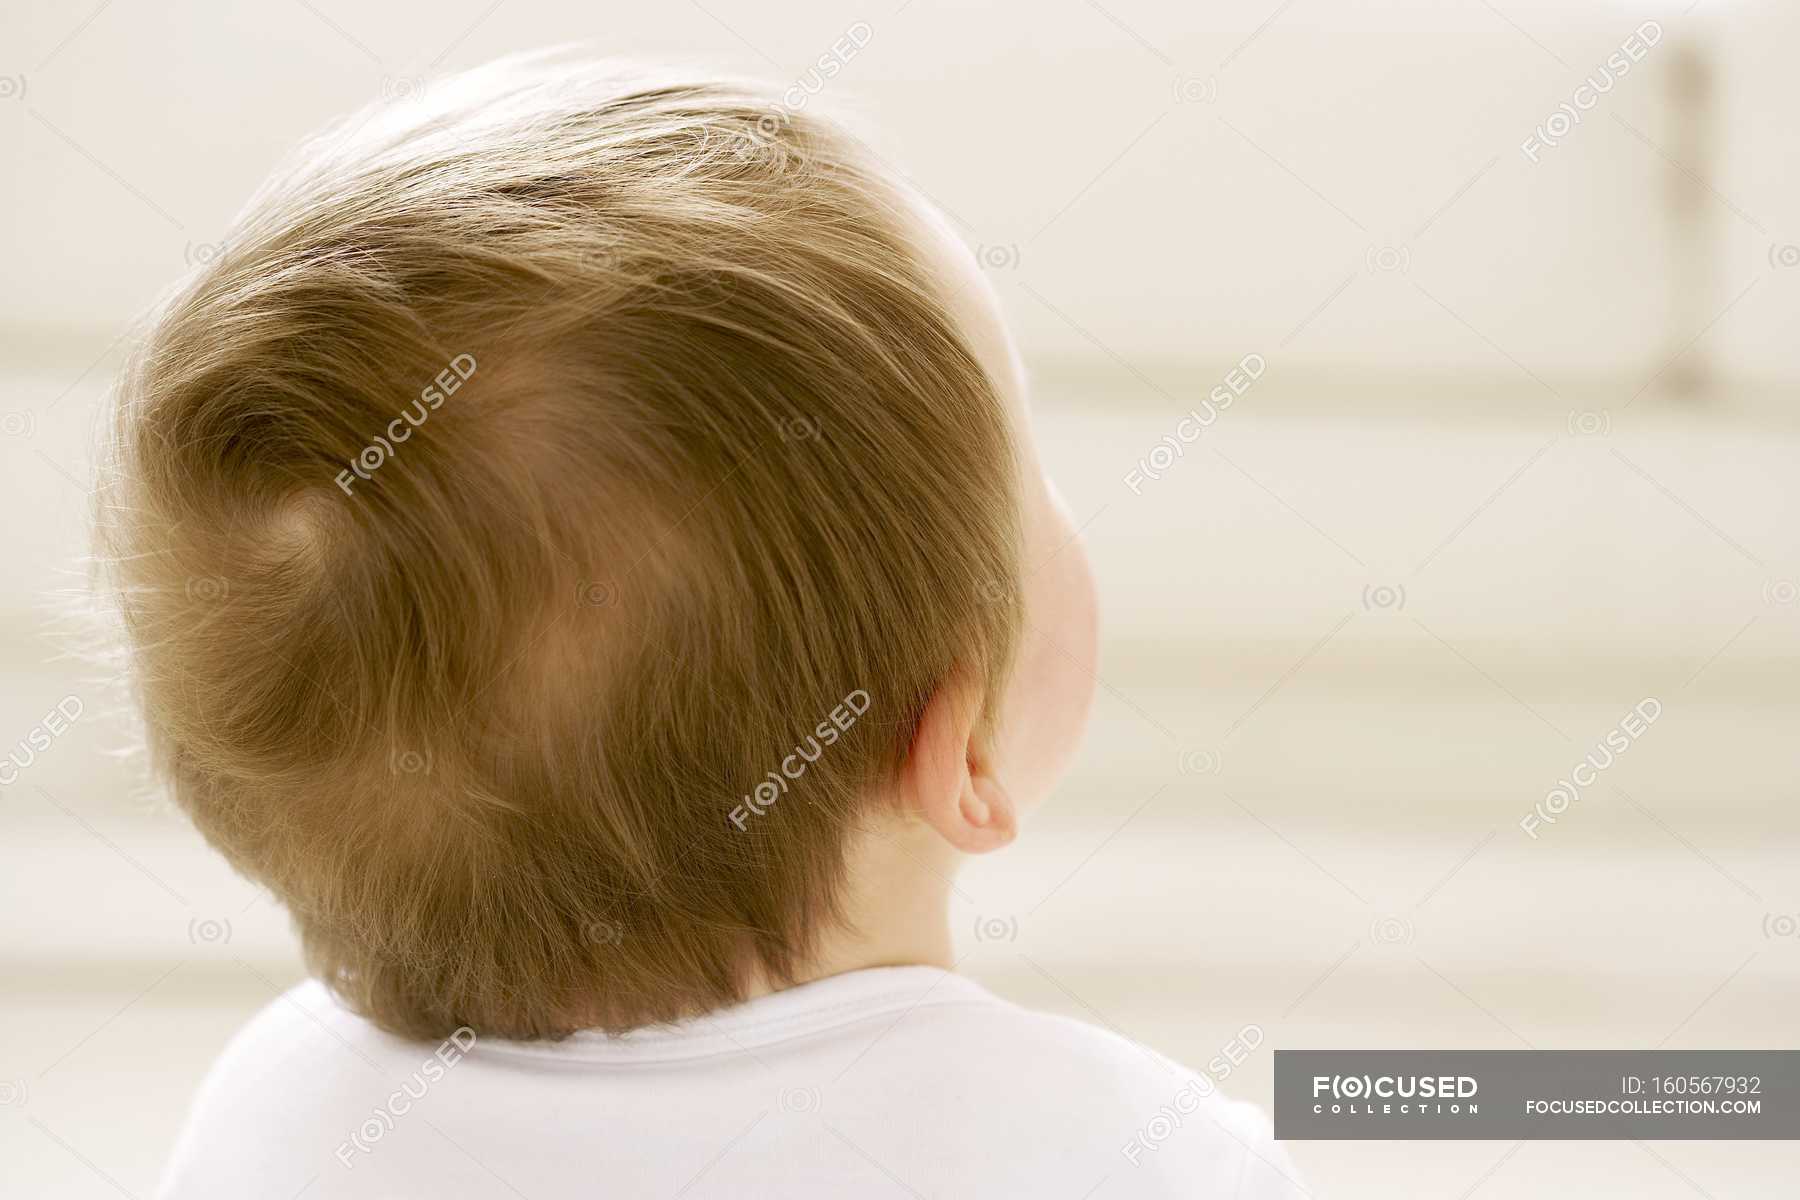 Rear view of baby boy head. — white, care - Stock Photo | #160567932